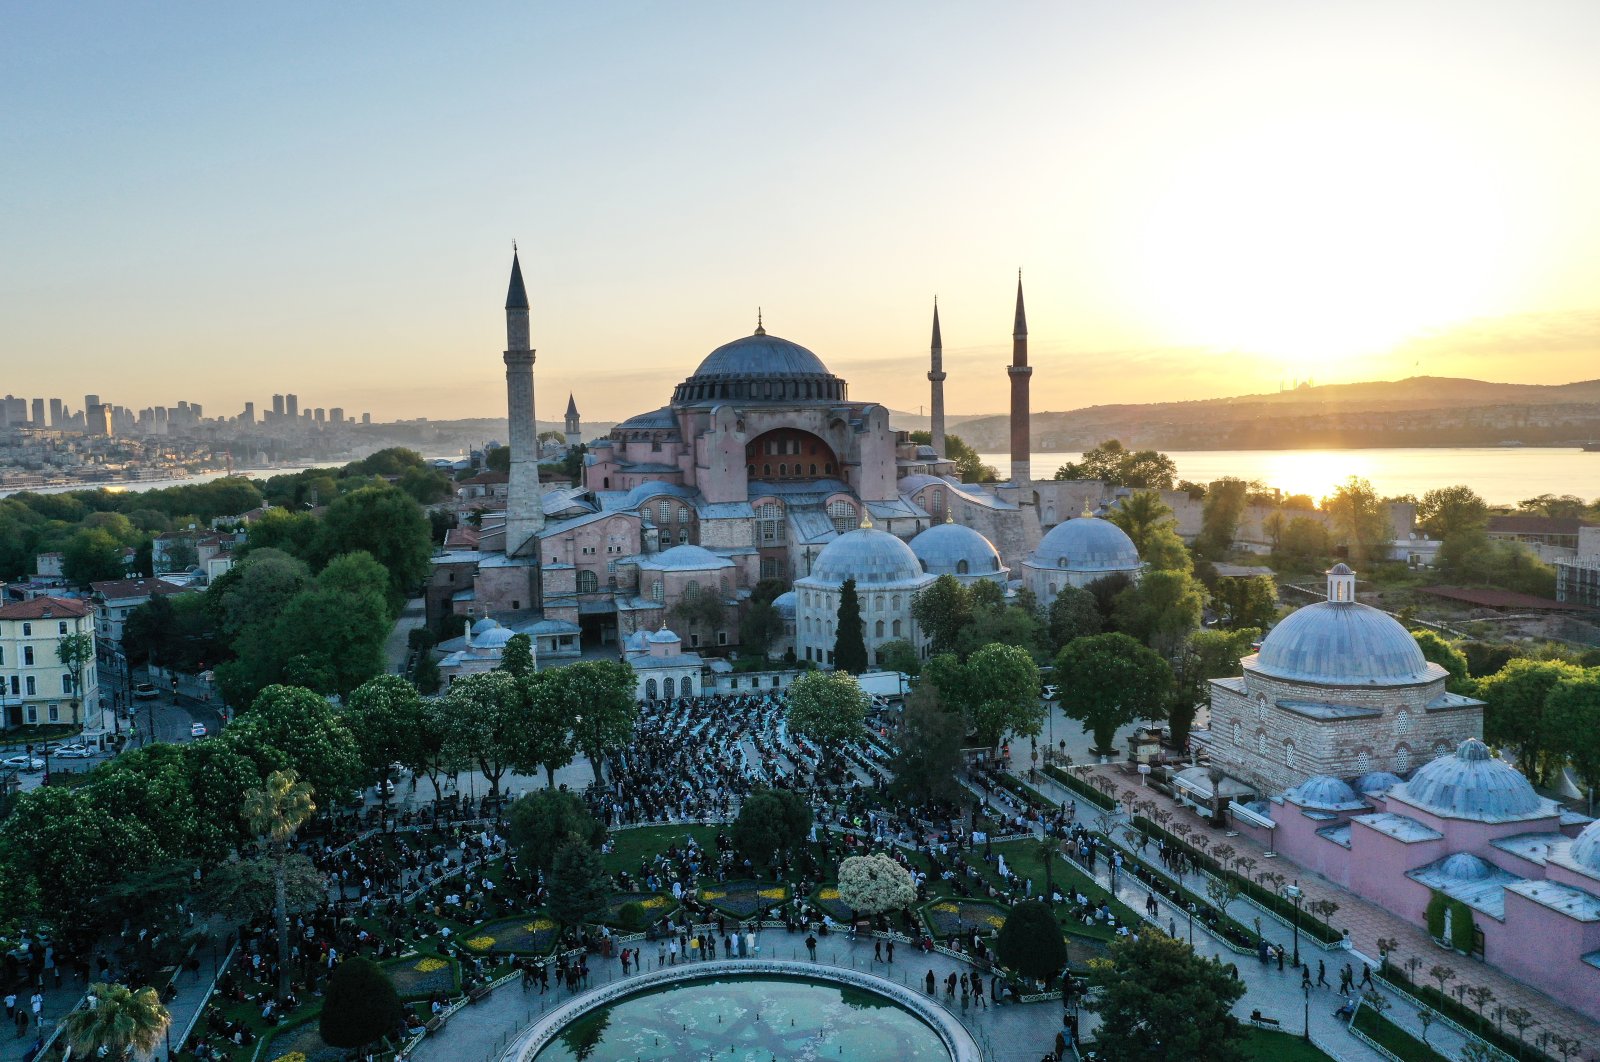 Time includes Istanbul in list of greatest places